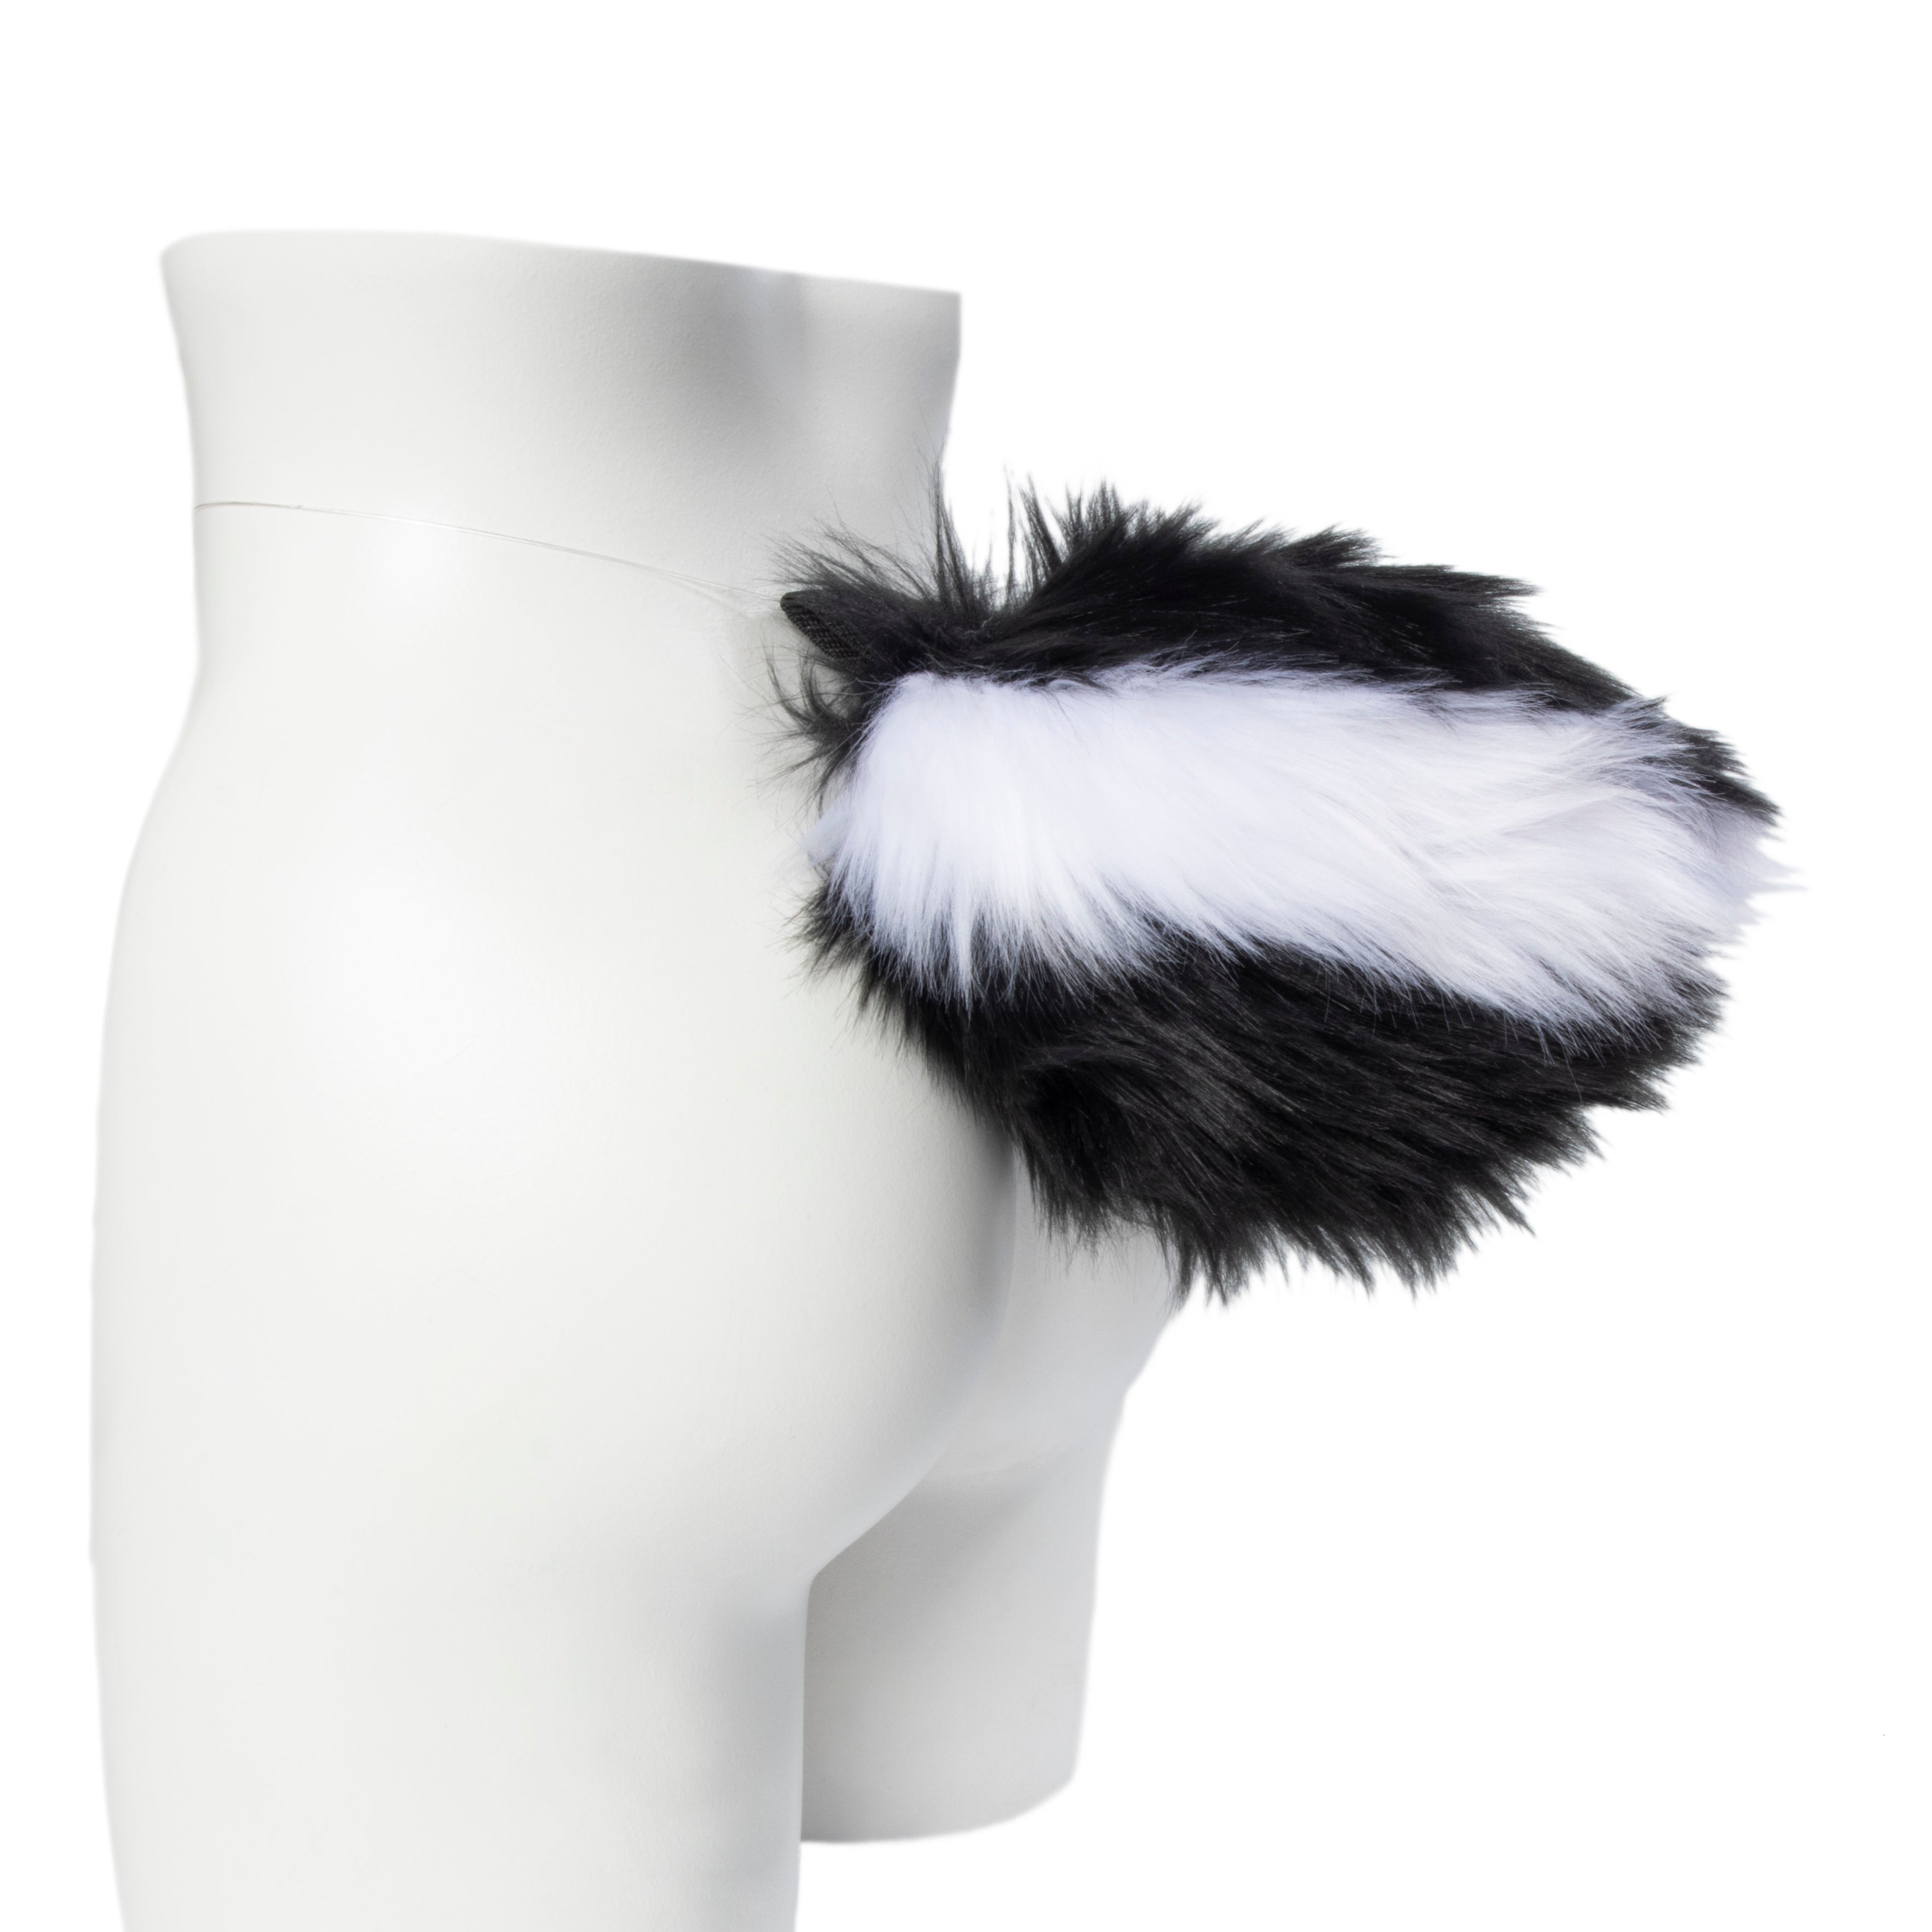 Bunny Tail+ - Pawstar Pawstar Tails bunny, cosplay, costume, furry, ship-15, ship-15day, Tail